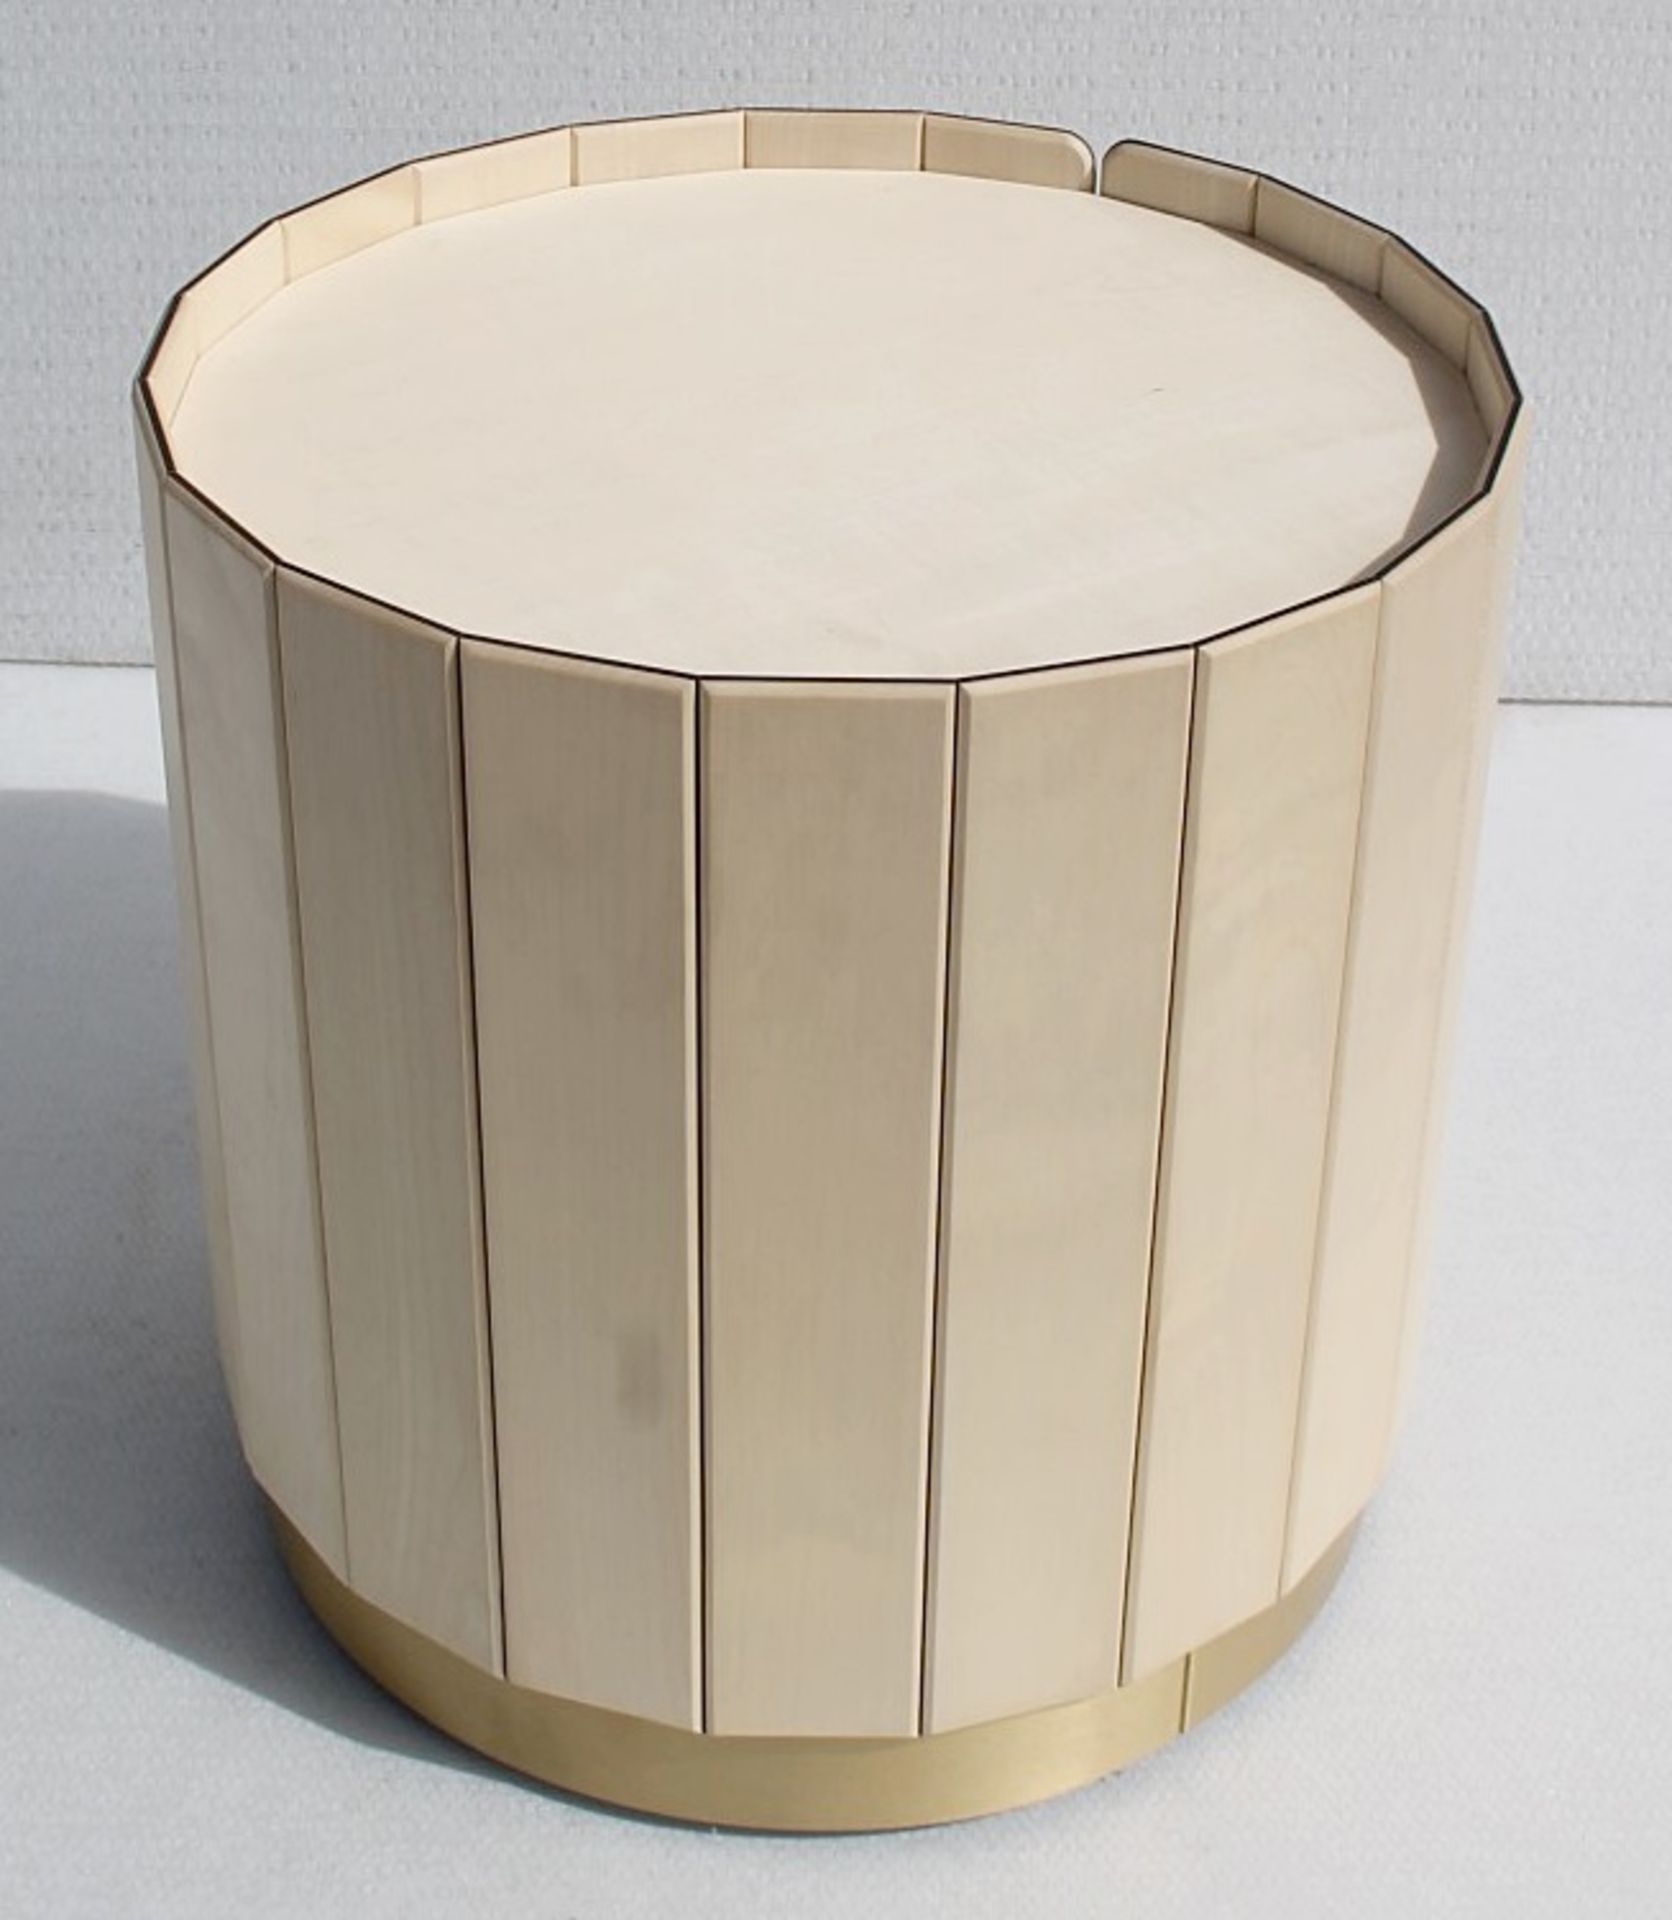 1 x BAXTER 'Ninfea' Italian Designer Solid Maple Bedside Table With Storage - Original Price £2,399 - Image 6 of 7